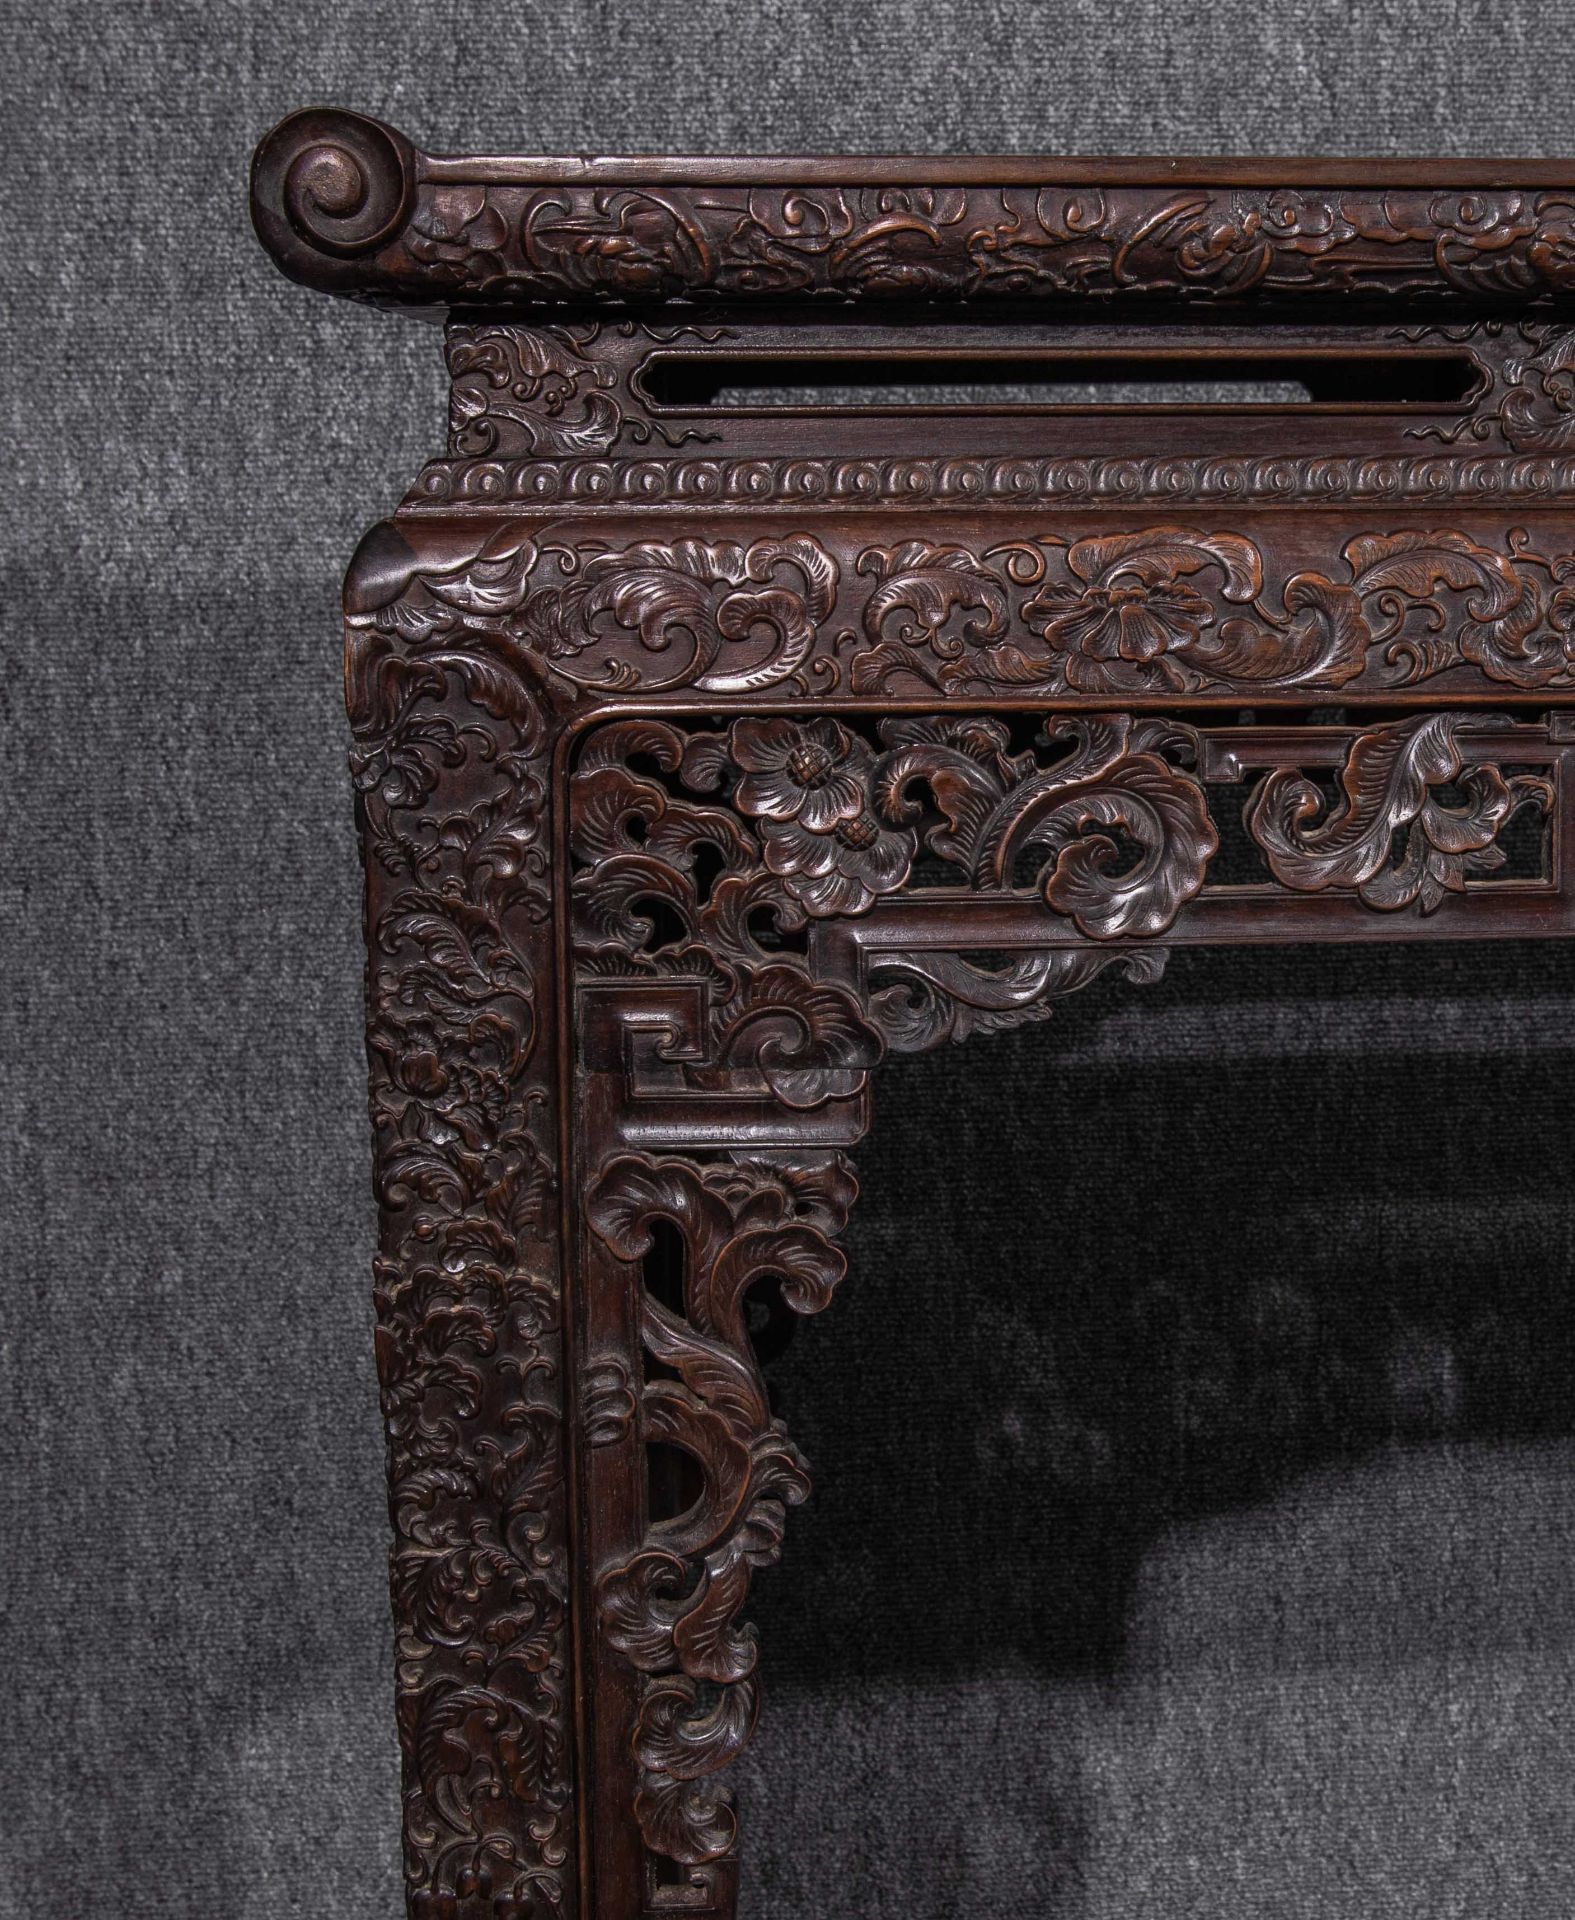 Chinese Qing Dynasty rosewood desk - Image 6 of 10